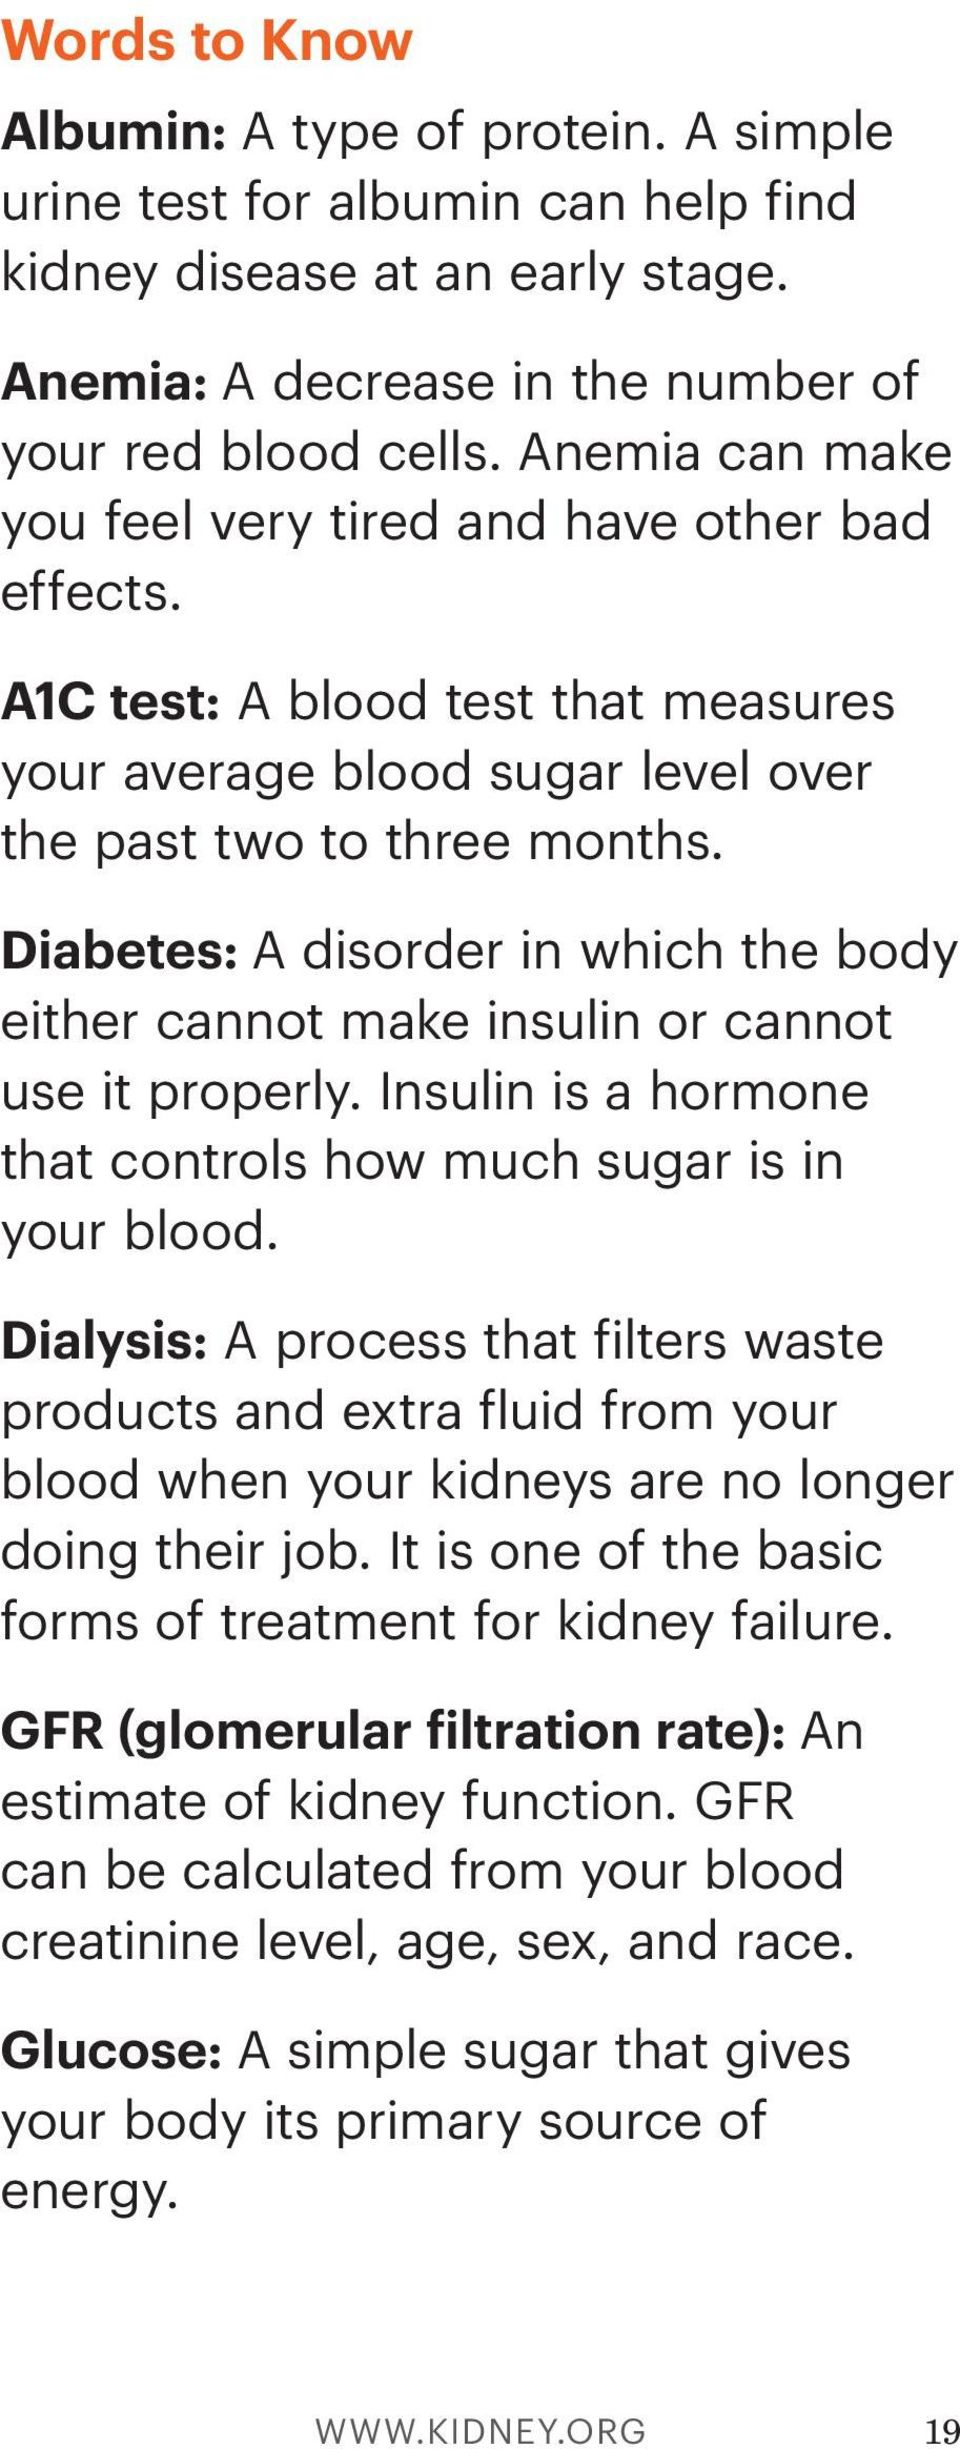 Diabetes: A disorder in which the body either cannot make insulin or cannot use it properly. Insulin is a hormone that controls how much sugar is in your blood.